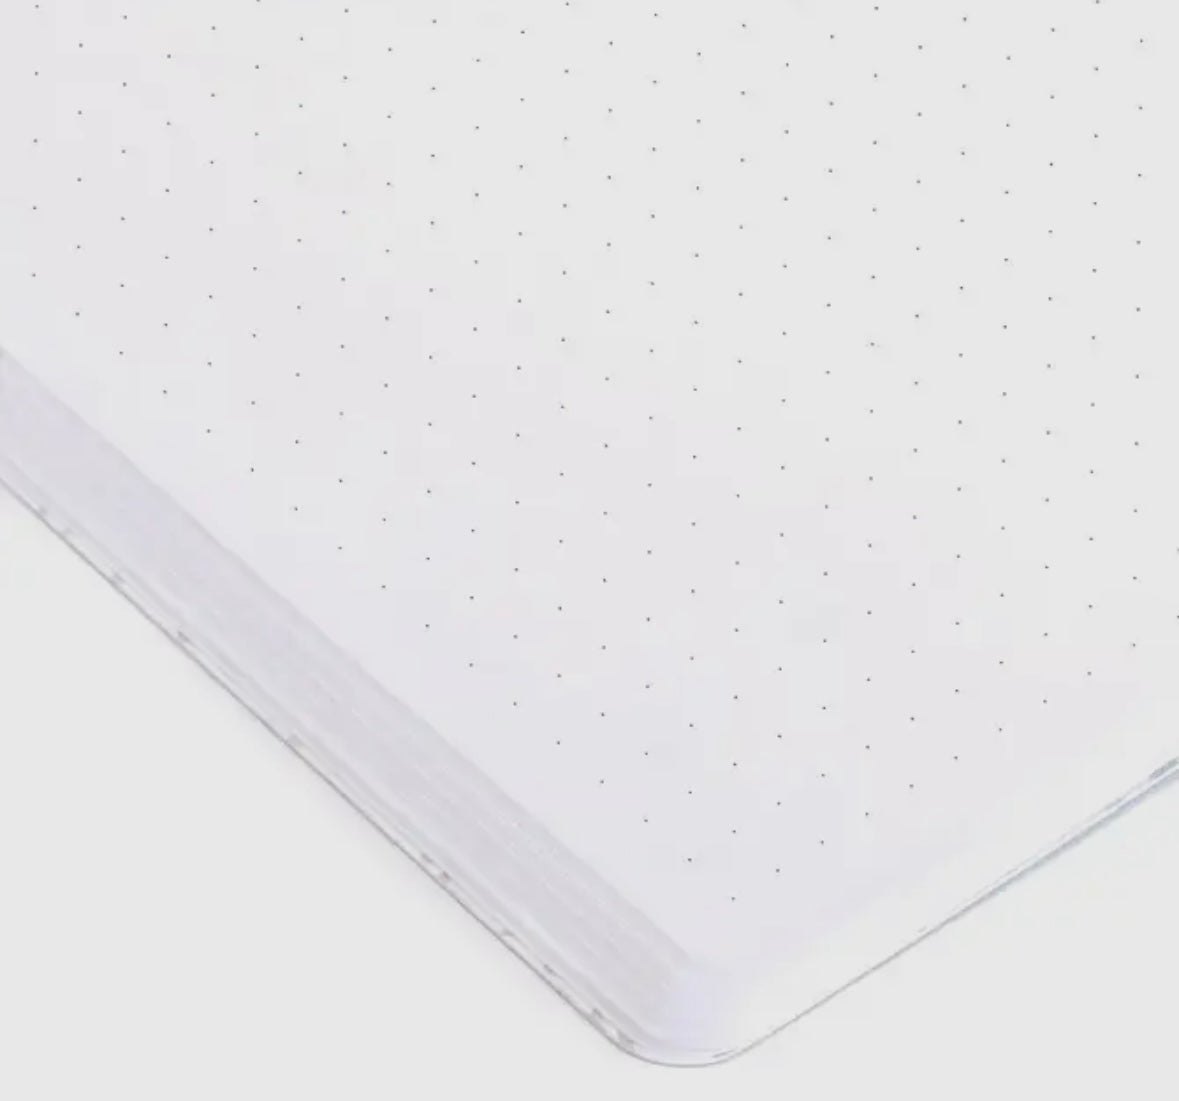 Pressed Floral Dotted Notebook